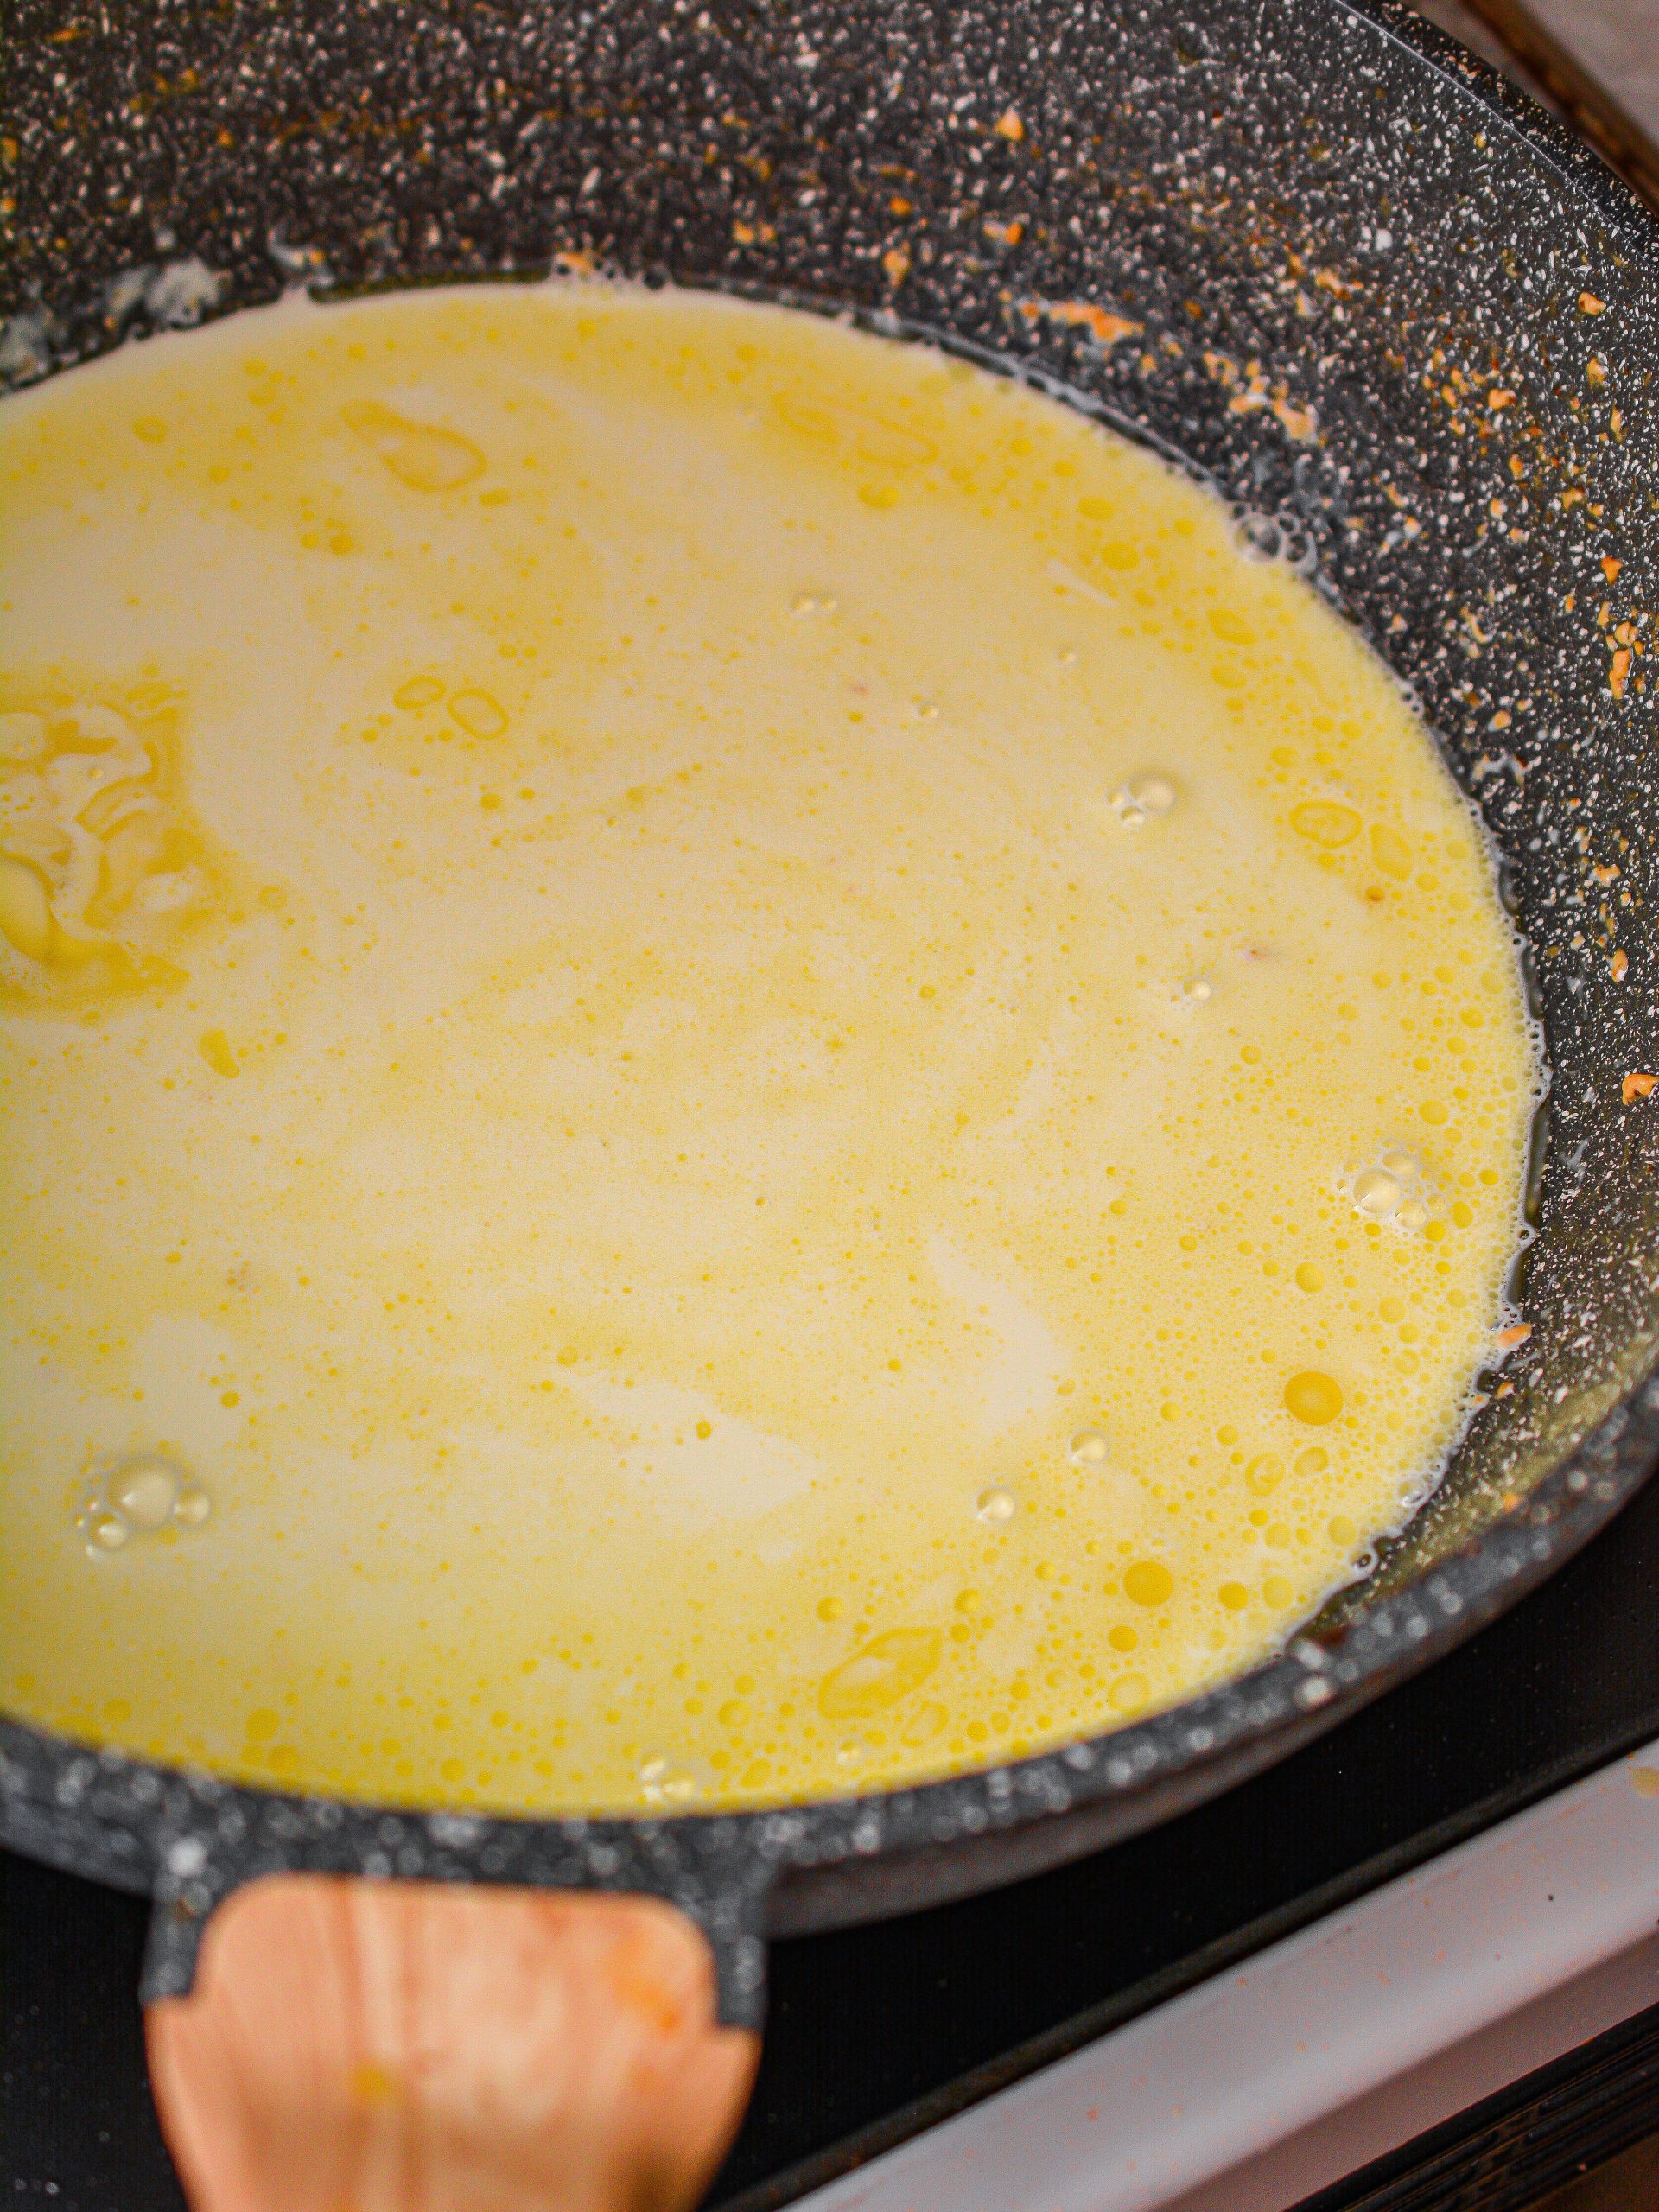 Stir until the cheese is melted and combined.